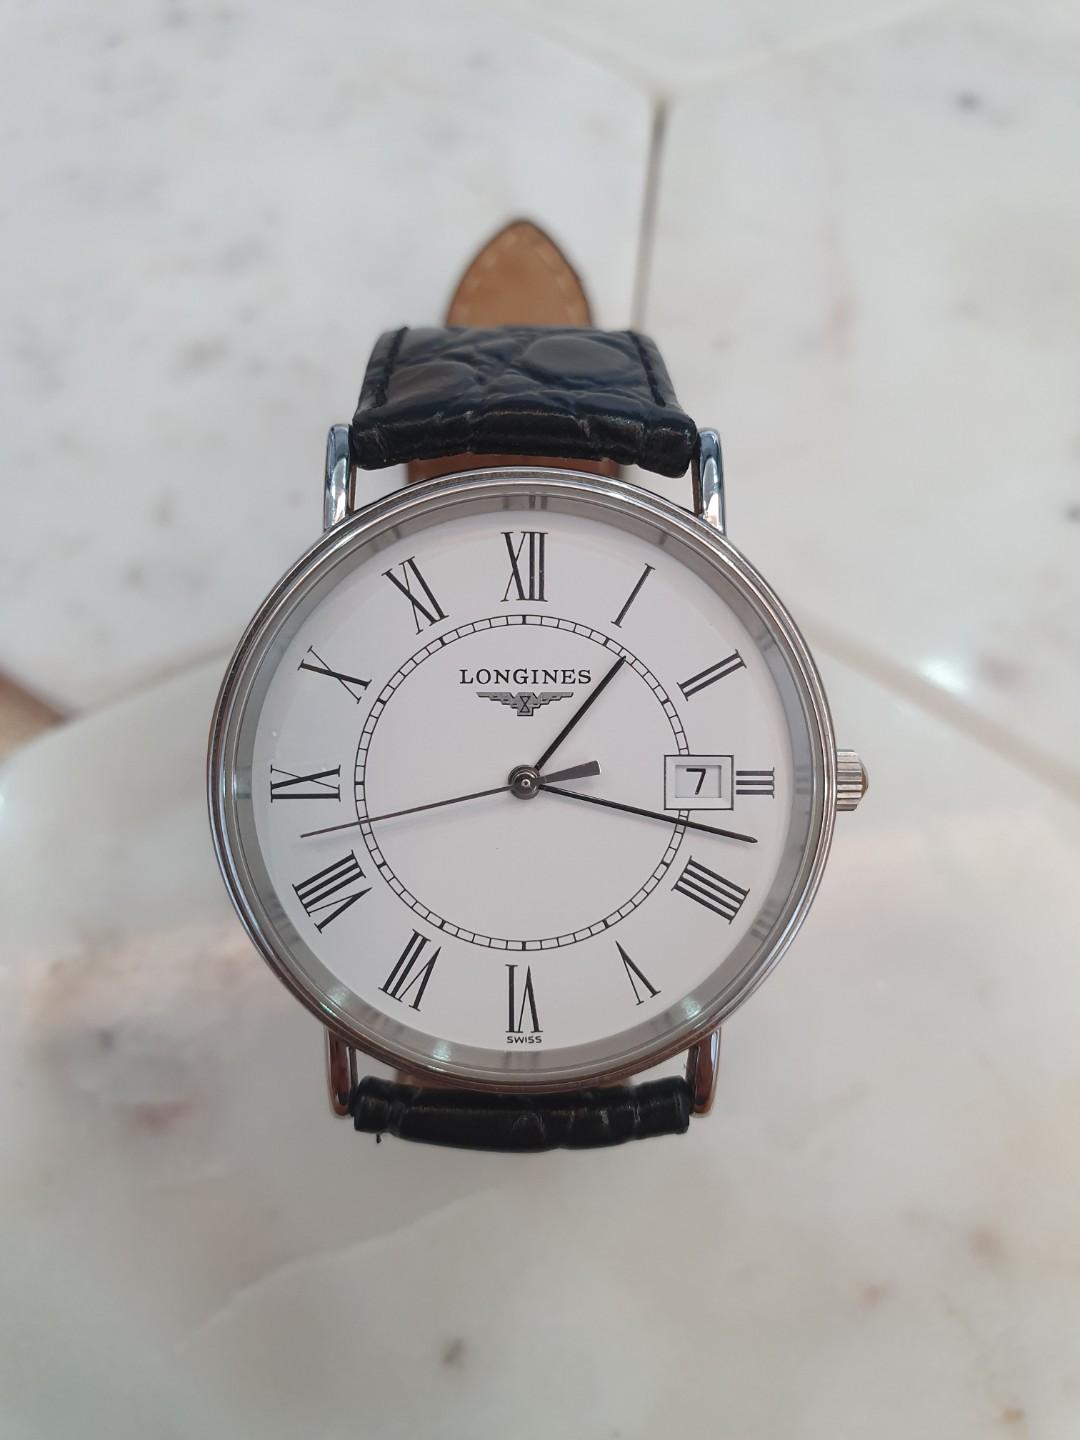 Longines Presence L4.720.4 watch in original leather strap, Mobile ...